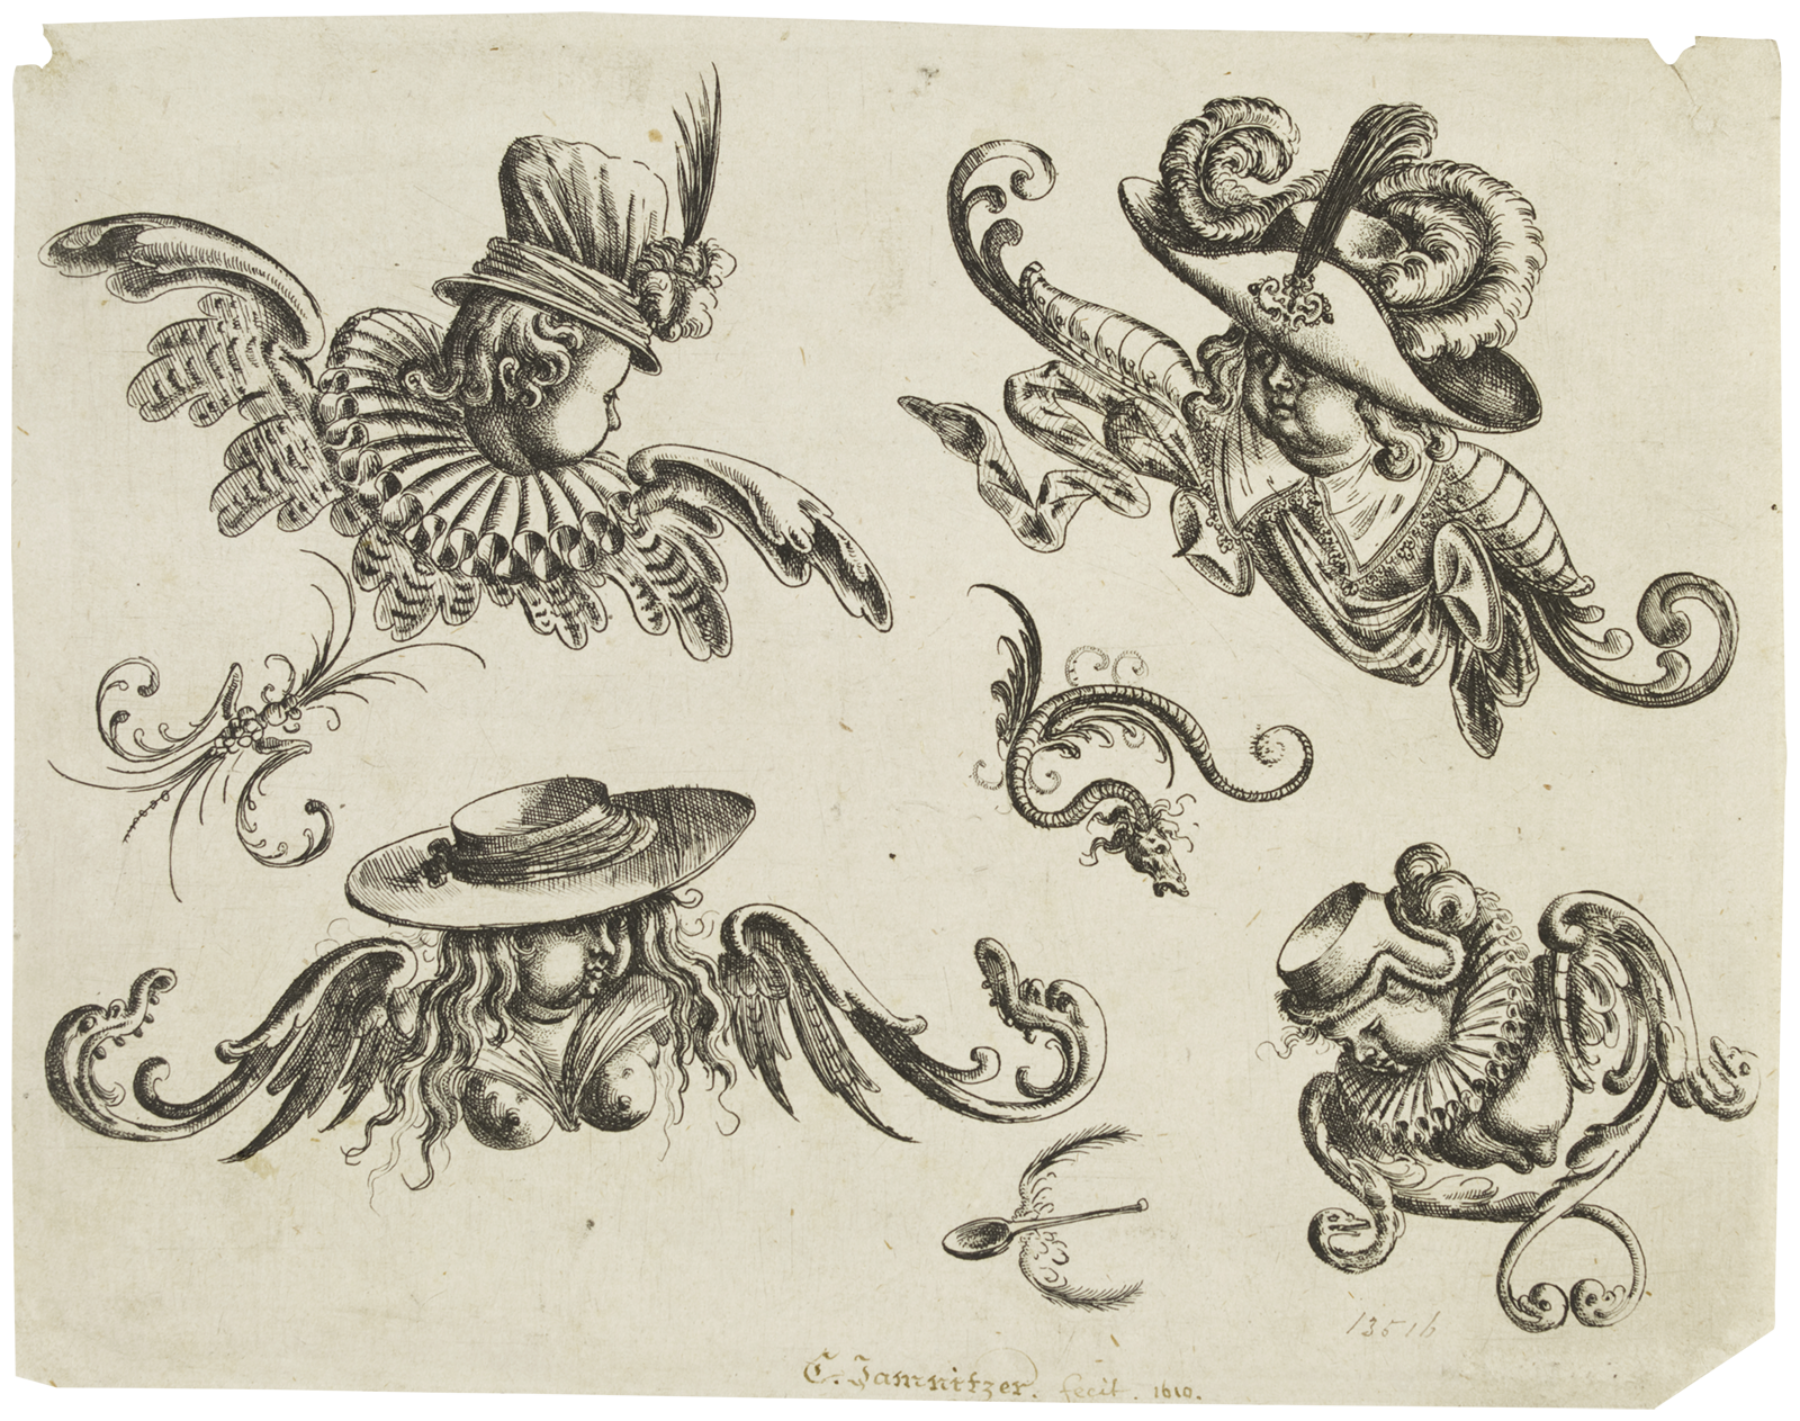 Christoph Jamnitzer, Das Neuw Grottesken Buch (The New Book of Grotesques), 1573–1610. Etching, 5 5/8 x 7 1/4 inches (14.3 x 18.3 cm) Victoria and Albert Museum, London, Ⓒ Victoria and Albert Museum, London.